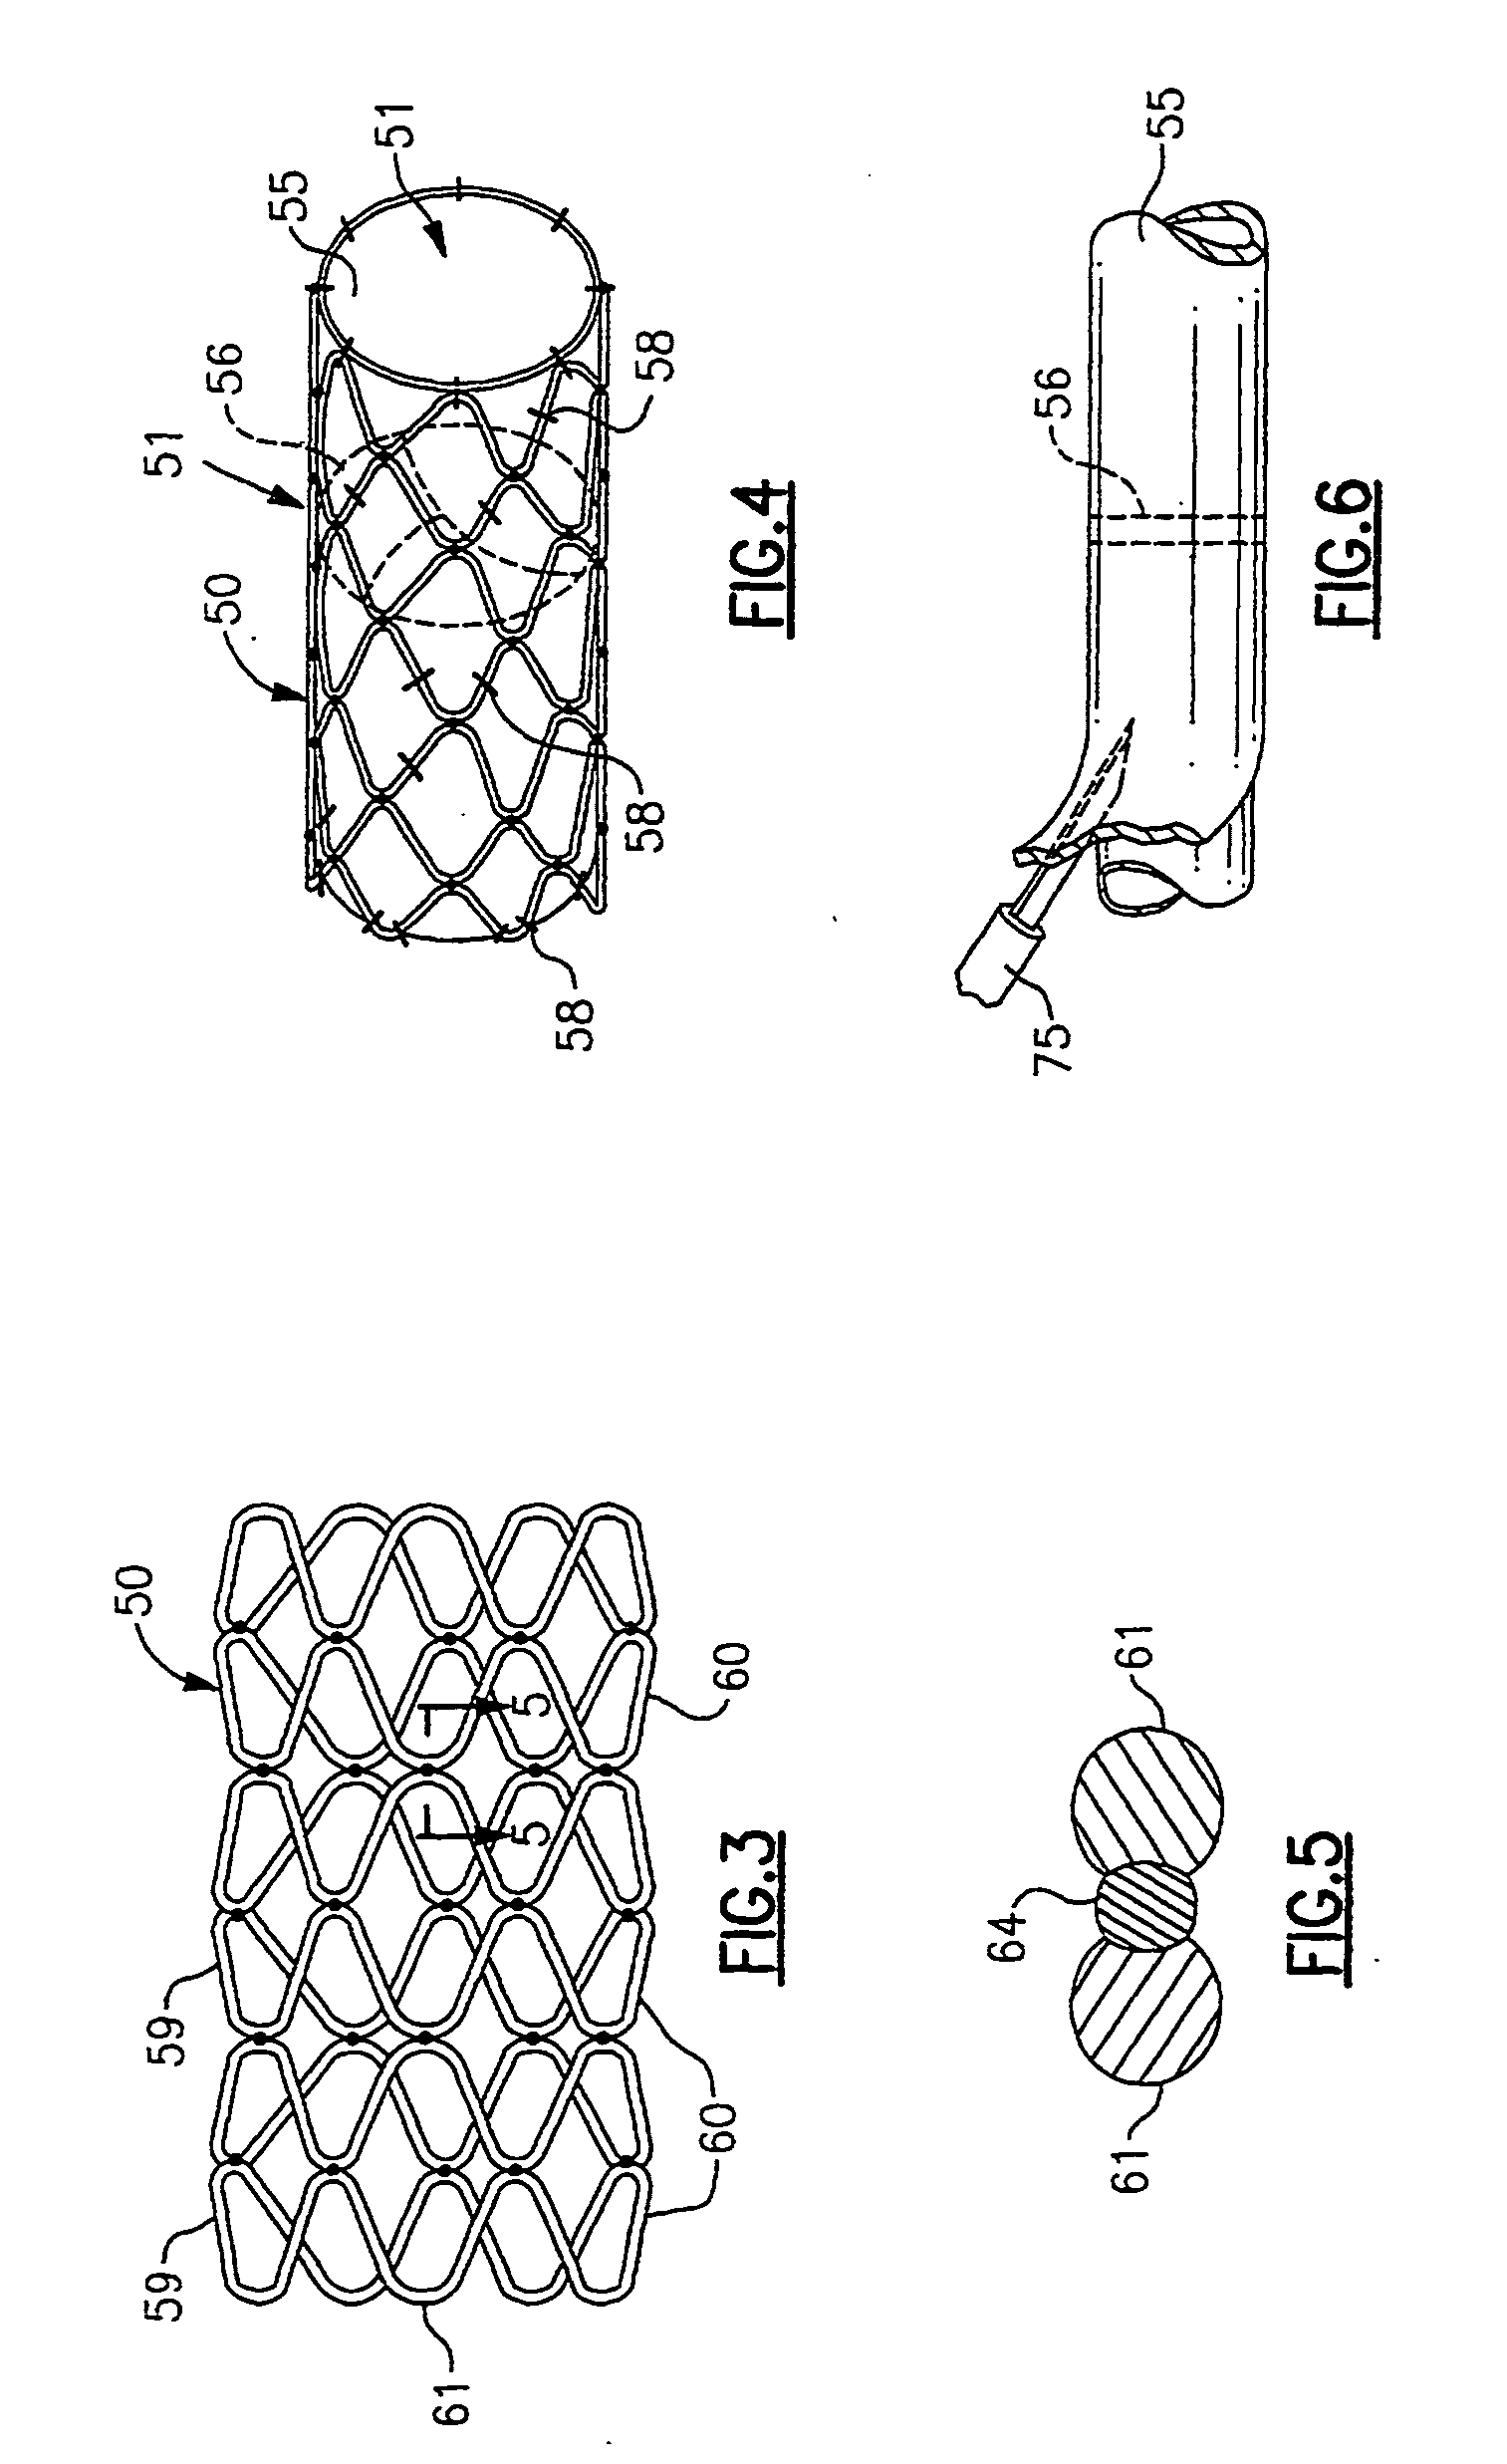 System for implanting a replacement valve